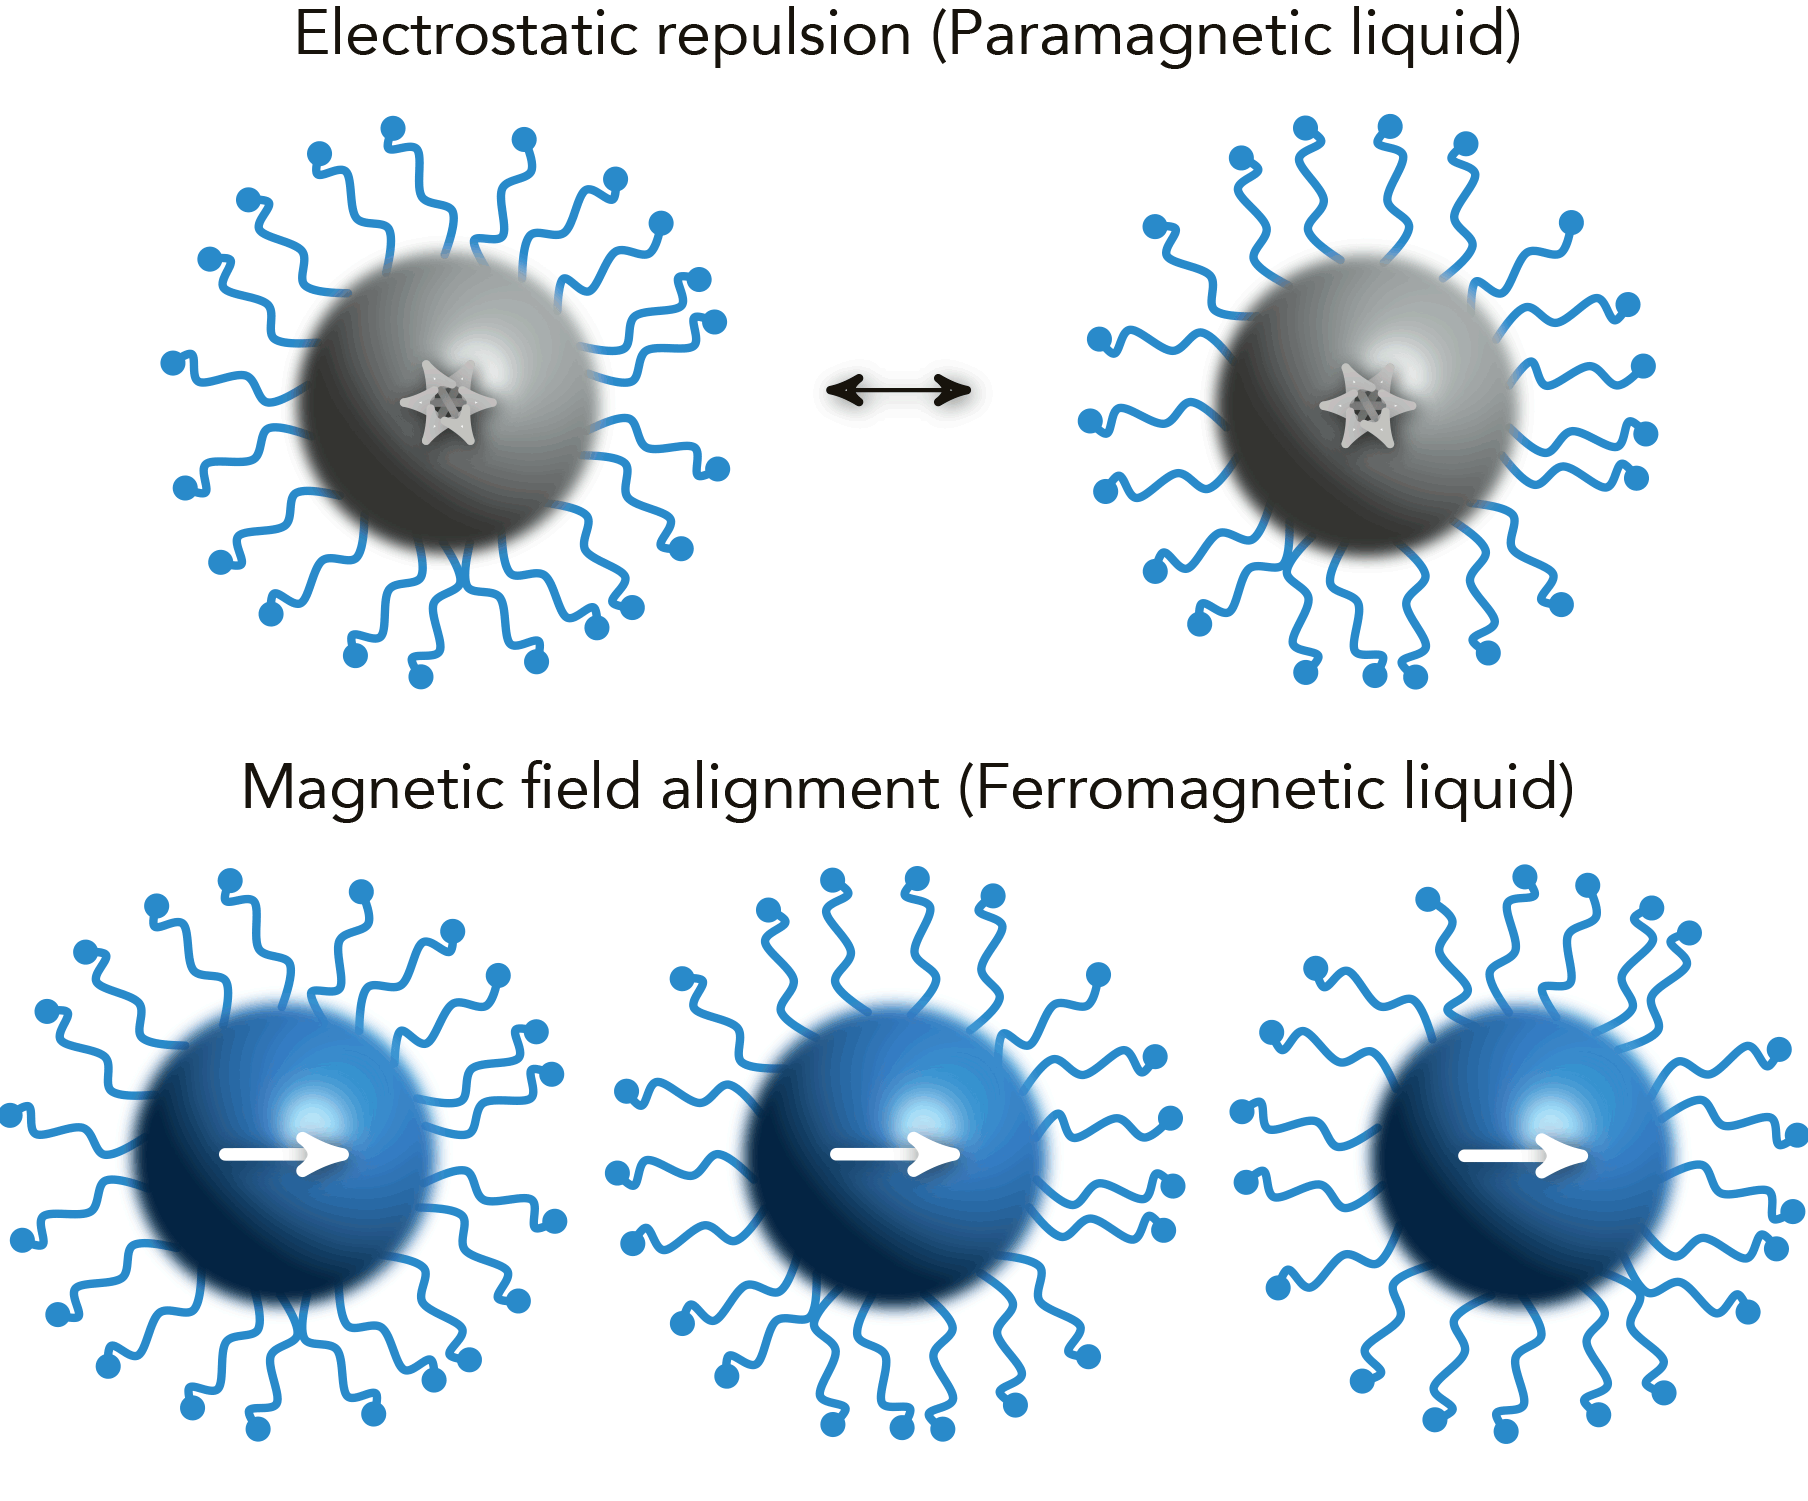 Fig. 2 (Click to enlarge). When no external magnetic field is present, the behavior of magnetic nanoparticles is governed by electrostatic repulsion—in other words, like charges repel, so the nanoparticles tend to stay away from one another (top). When an external magnetic field is applied, however, the magnetic nanoparticles align so that the north pole of one particle attracts the south pole of an adjacent particle (bottom).